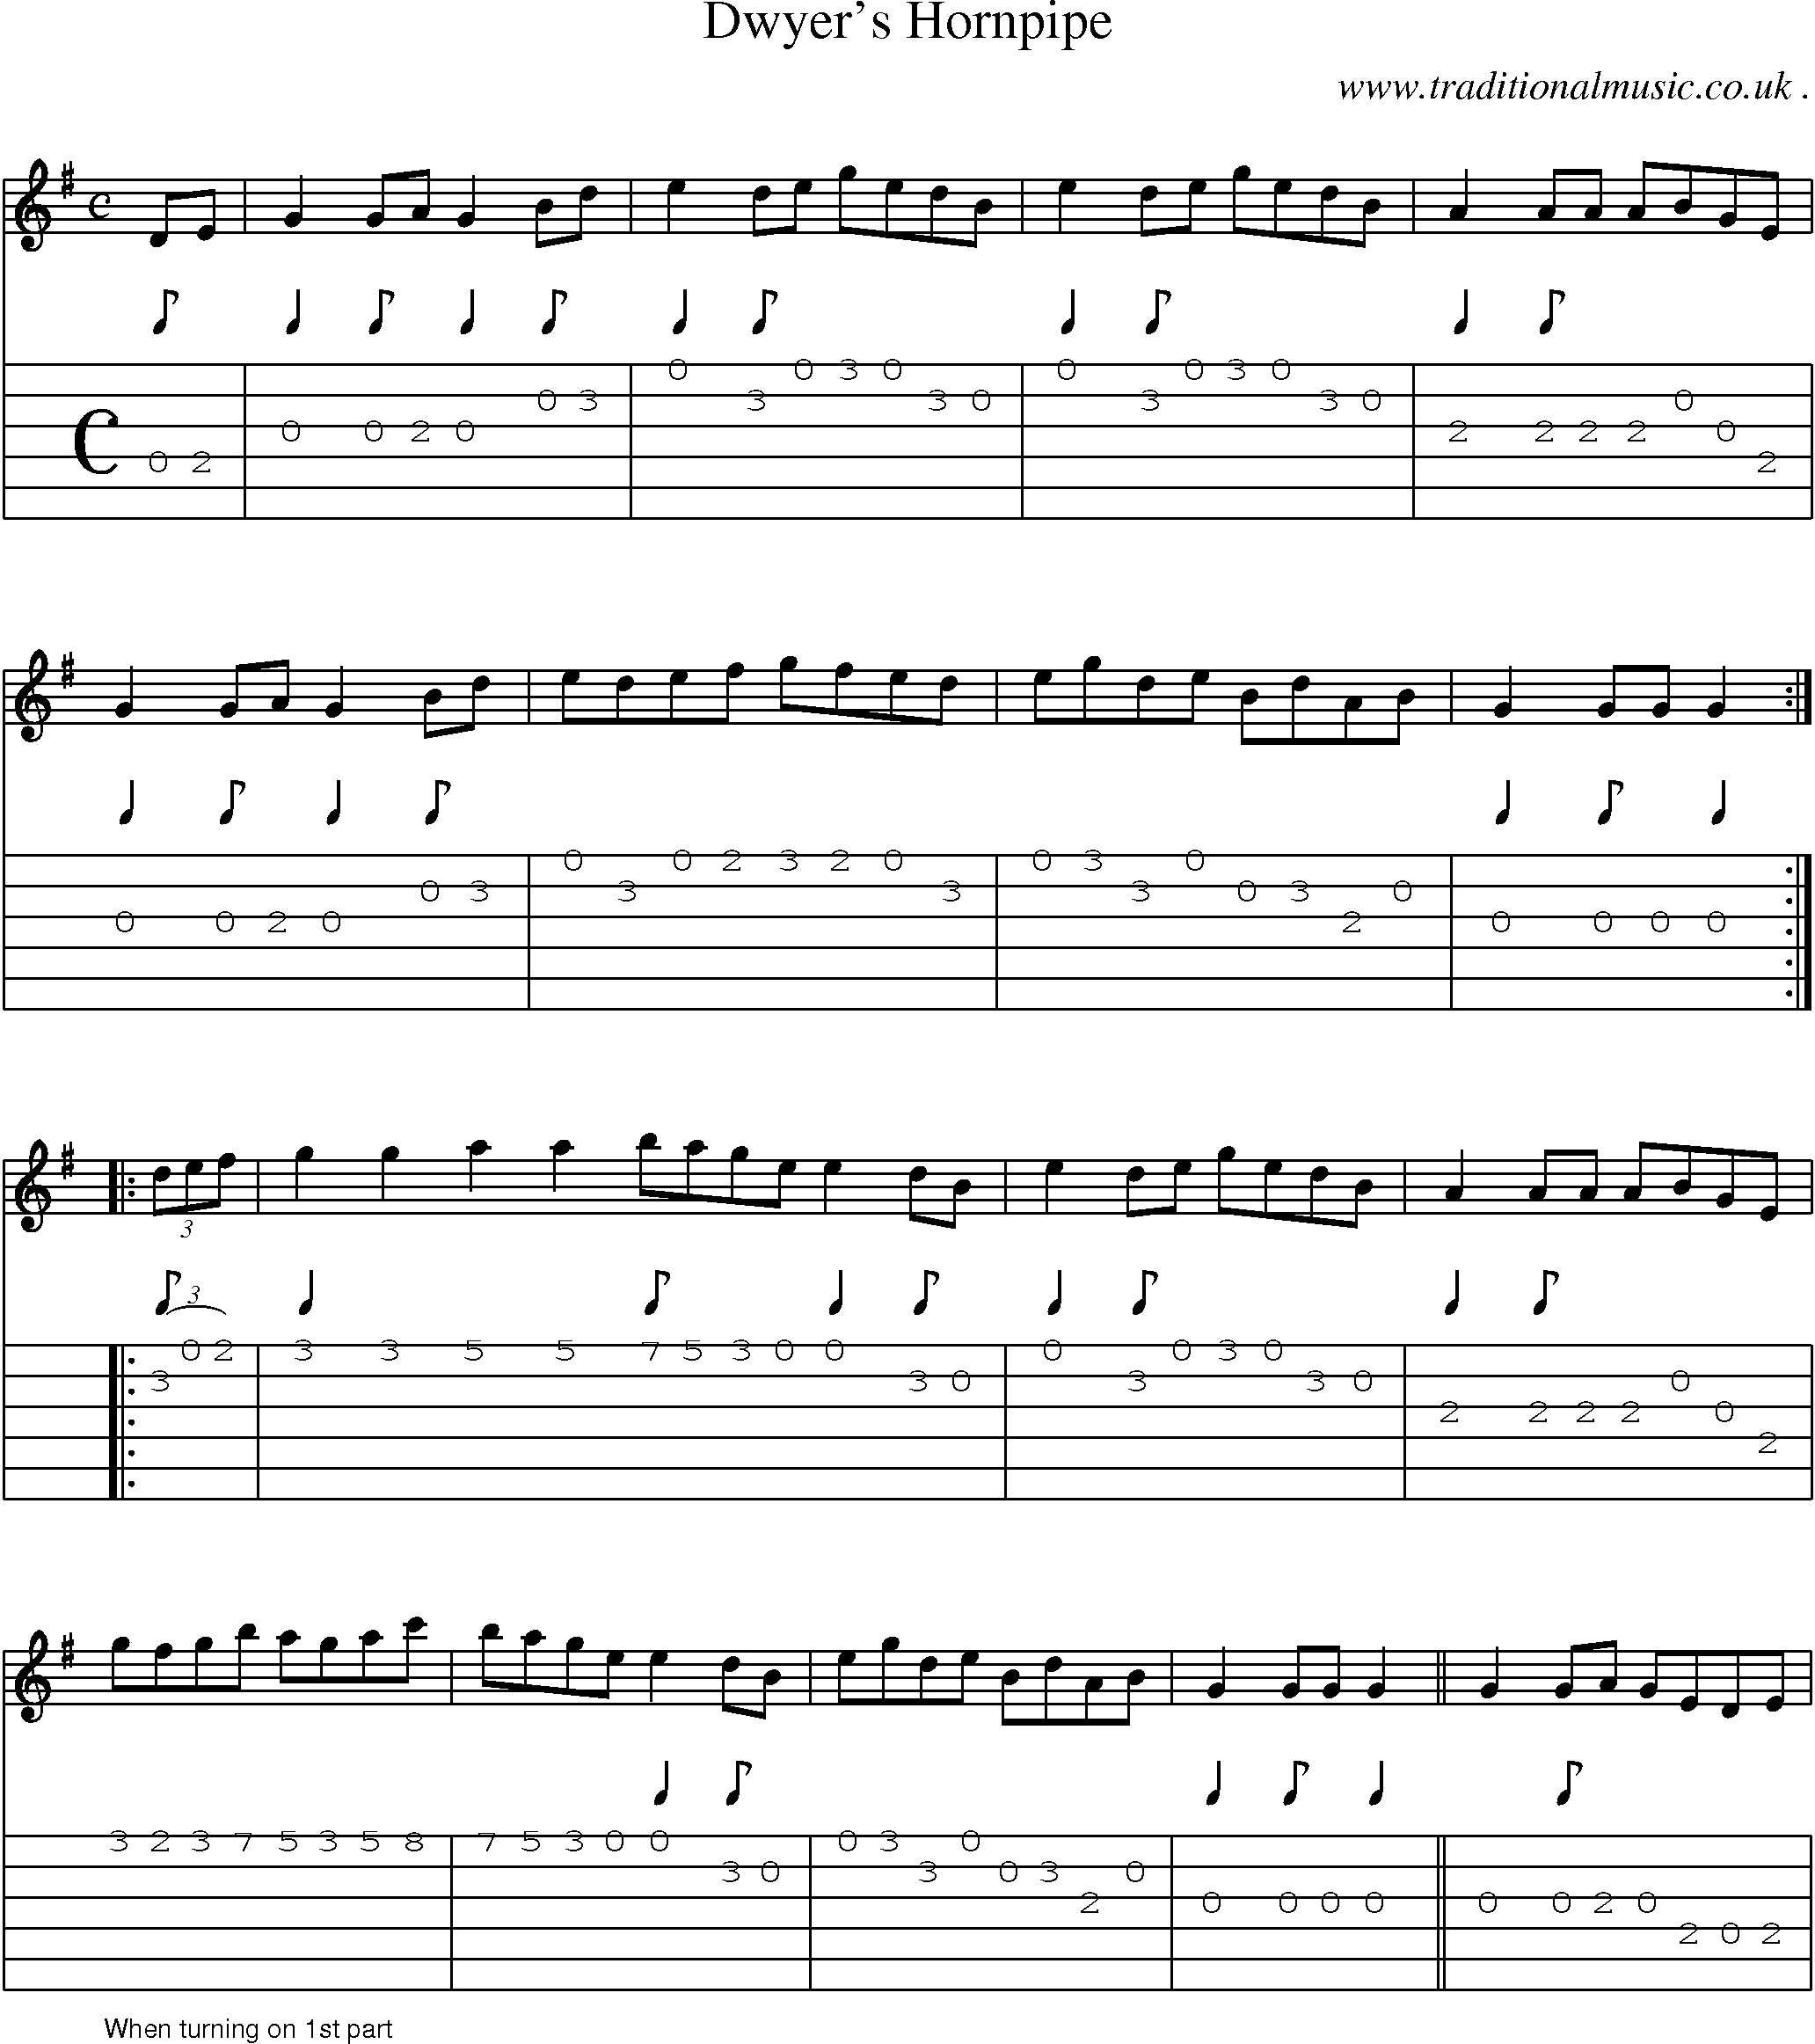 Sheet-Music and Guitar Tabs for Dwyers Hornpipe